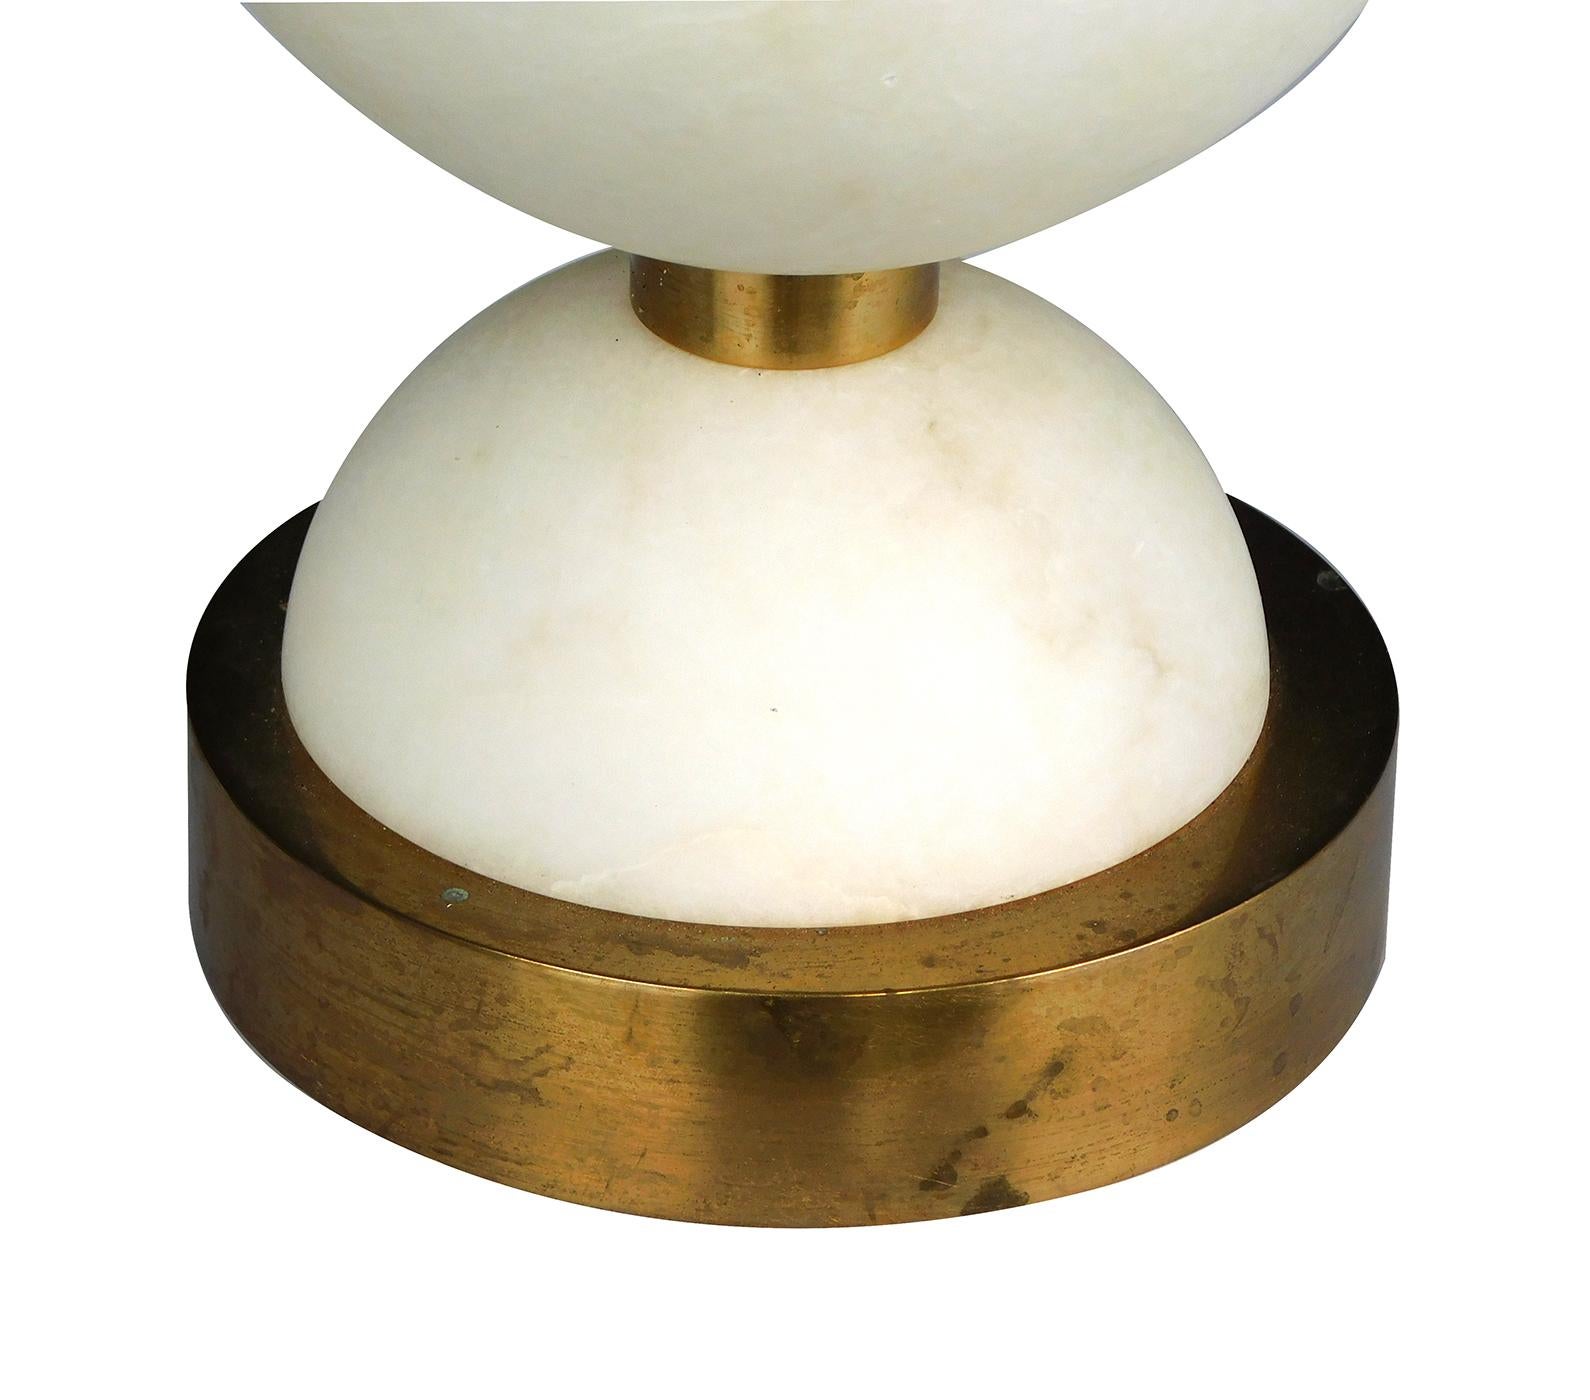 Each modeled as stacked half-spheres on a brass circular base.